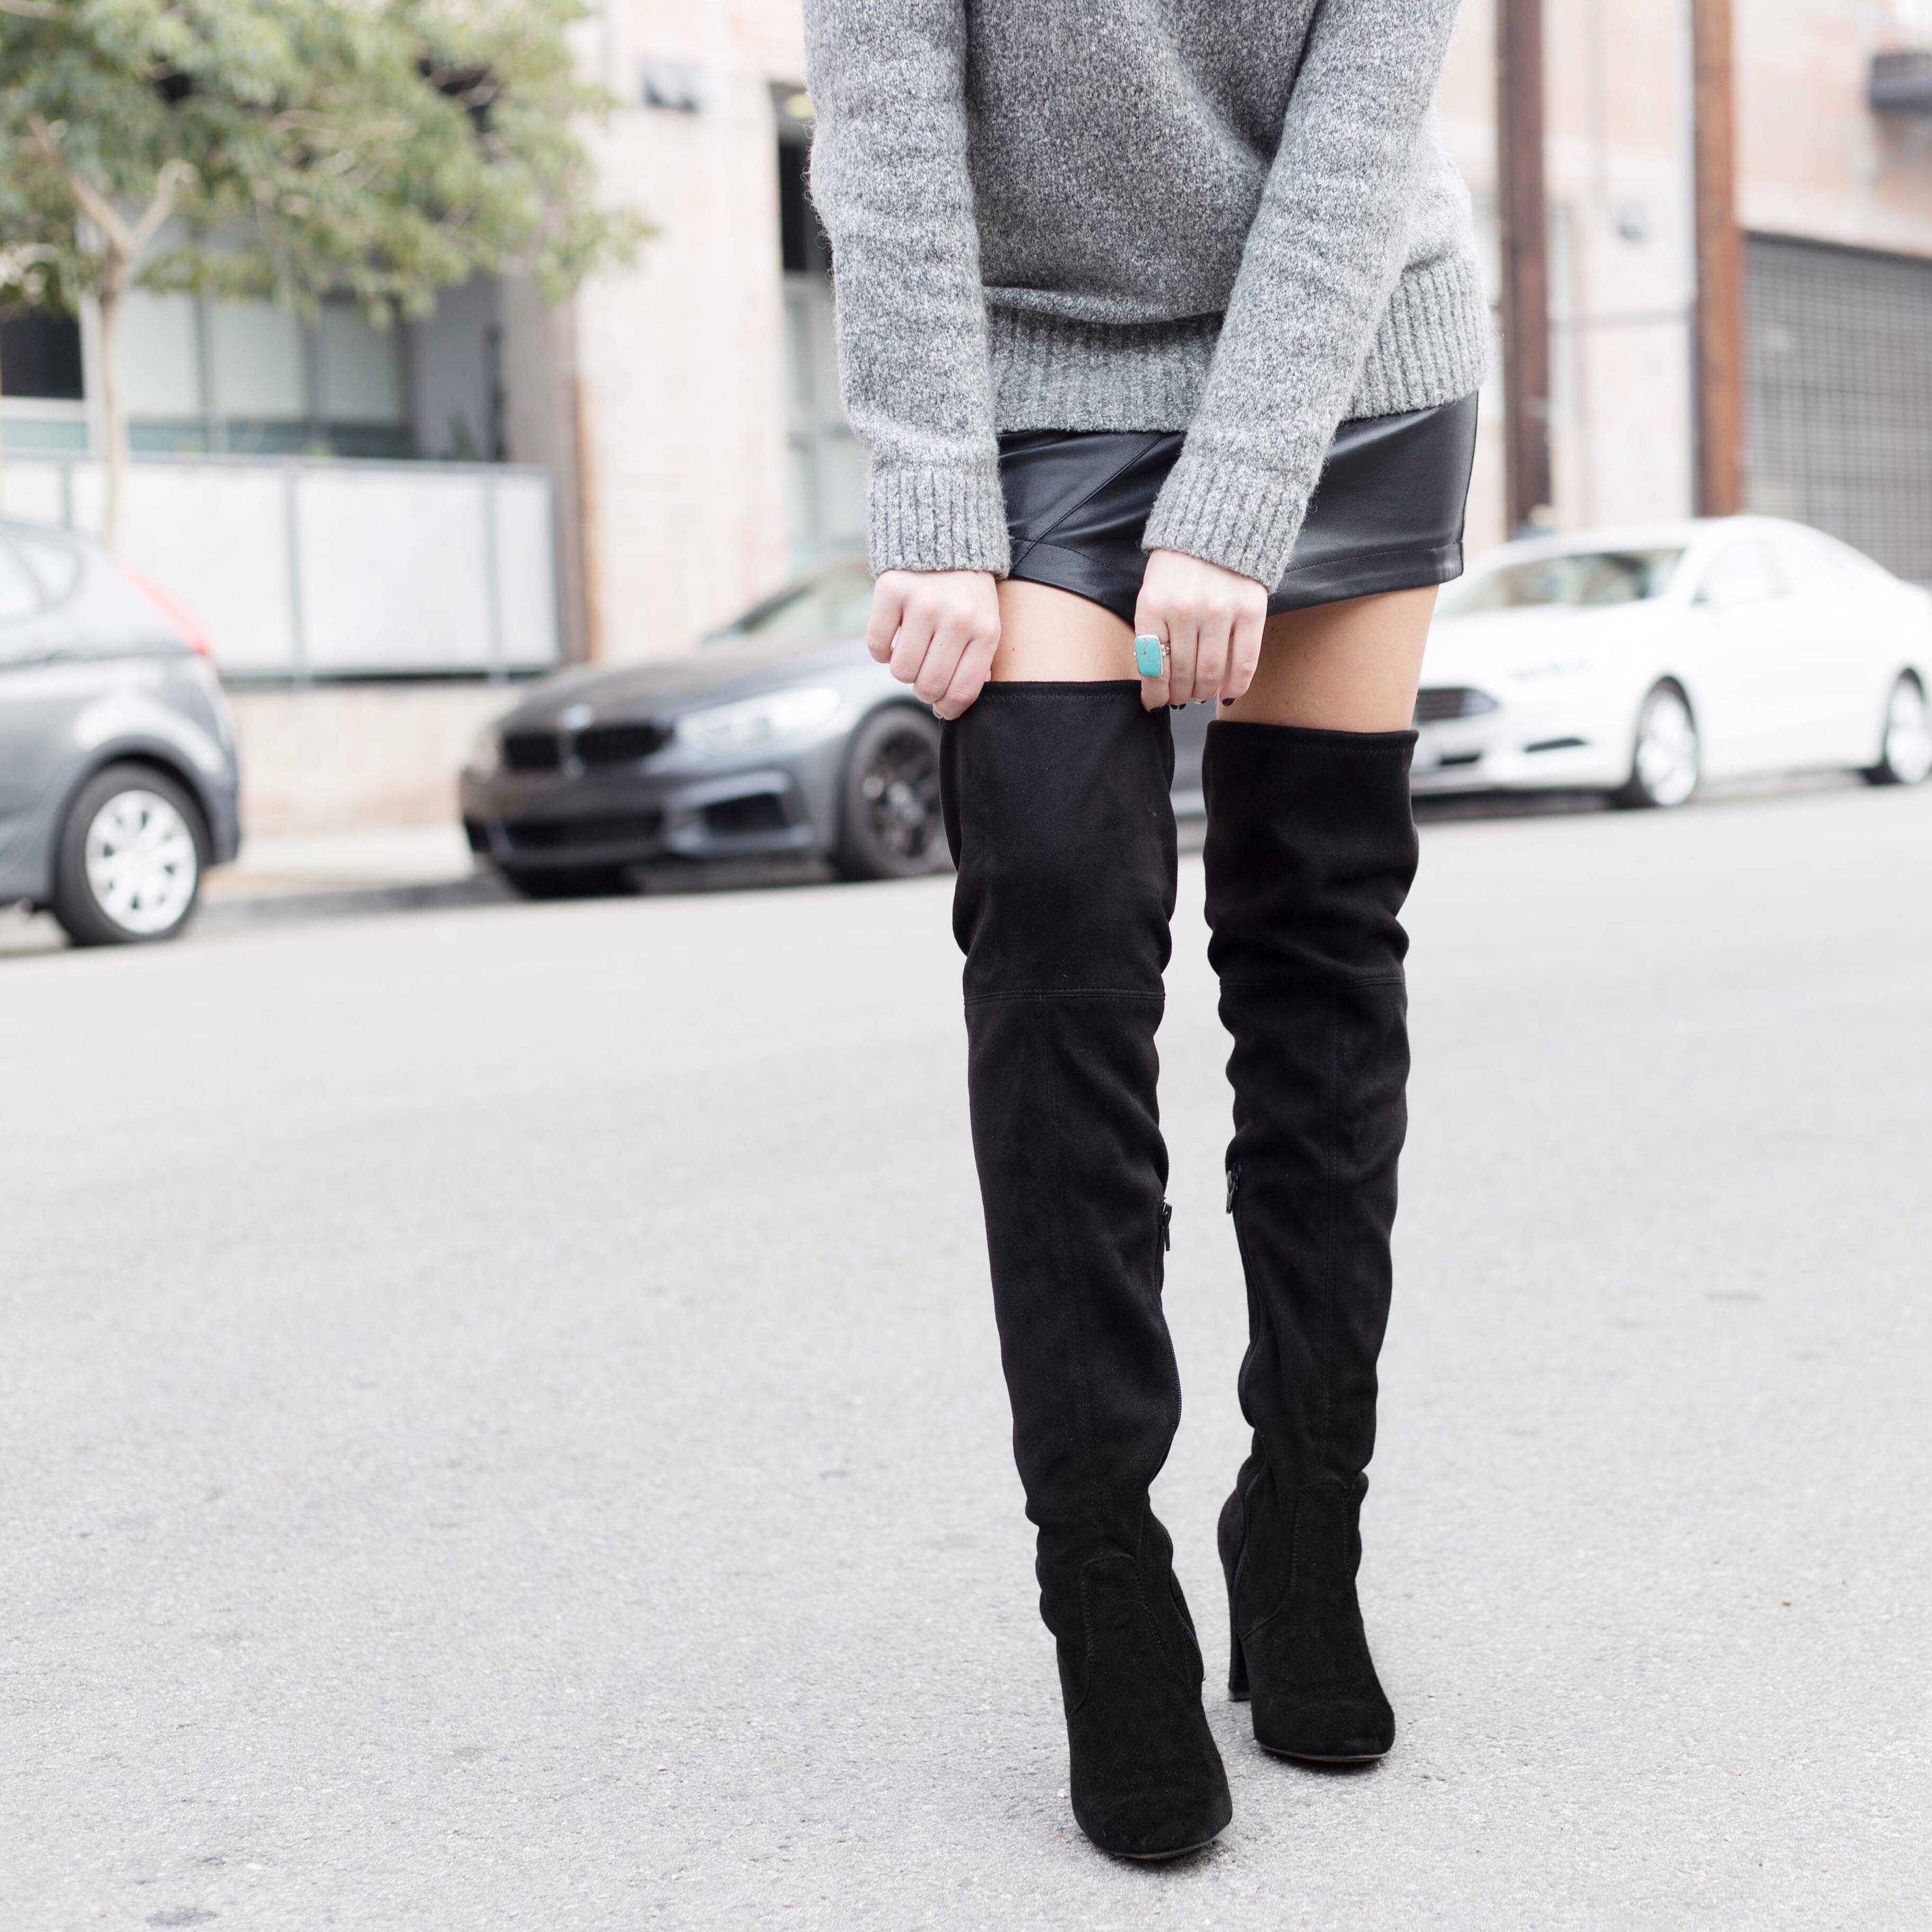 How to Style Over the Knee Boots | TwinspirationHow to Style Over the Knee Boots | Twinspiration